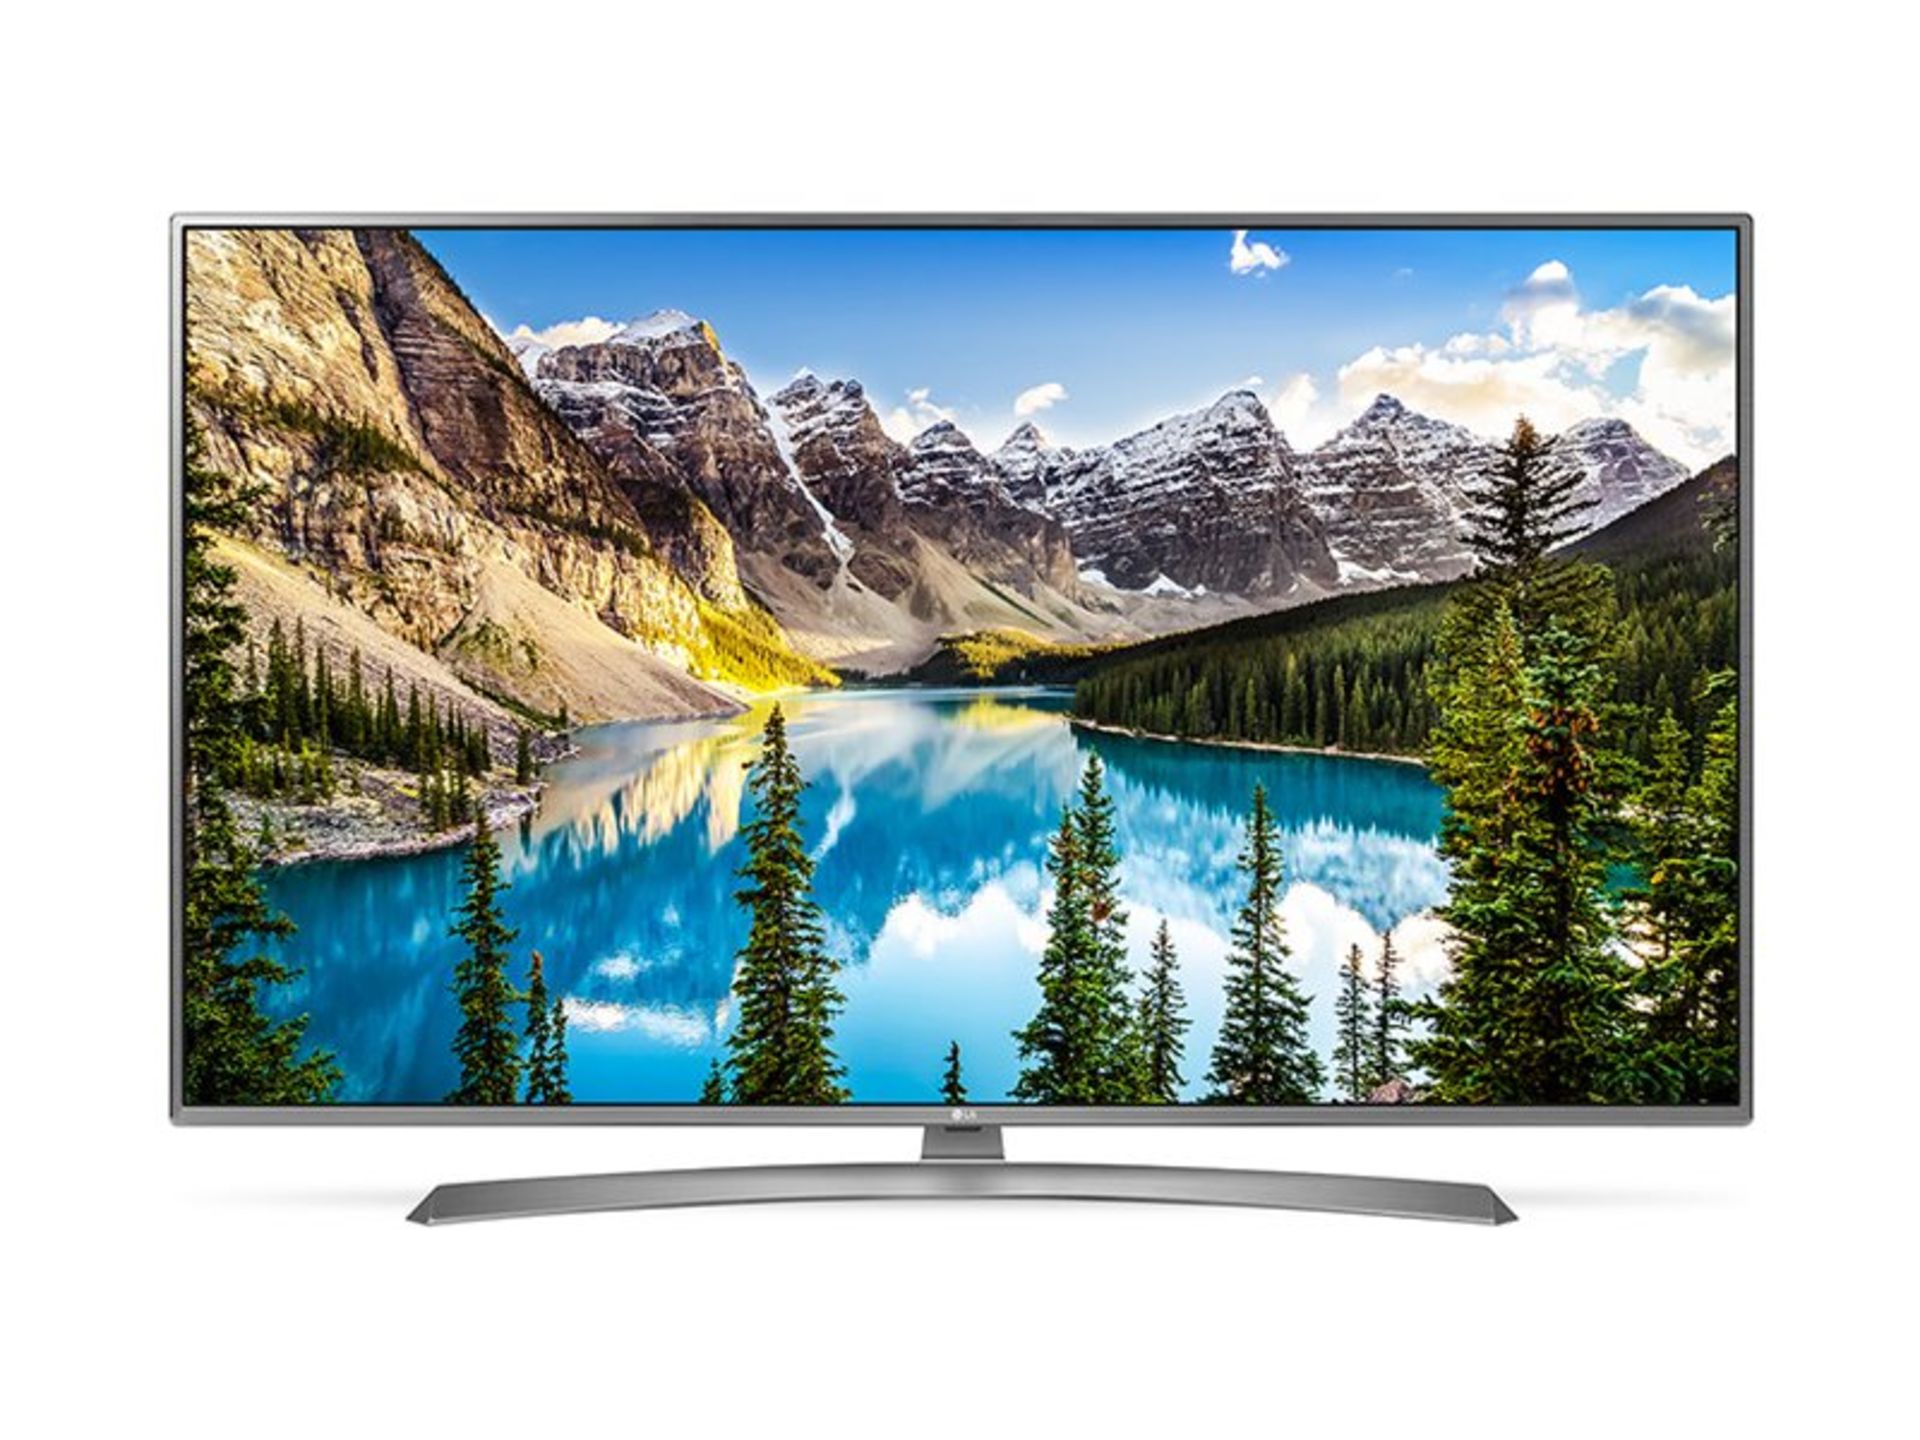 V Grade A LG 43 Inch ACTIVE HDR 4K ULTRA HD LED SMART TV WITH FREEVIEW HD & WEBOS 3.5 & WIFI